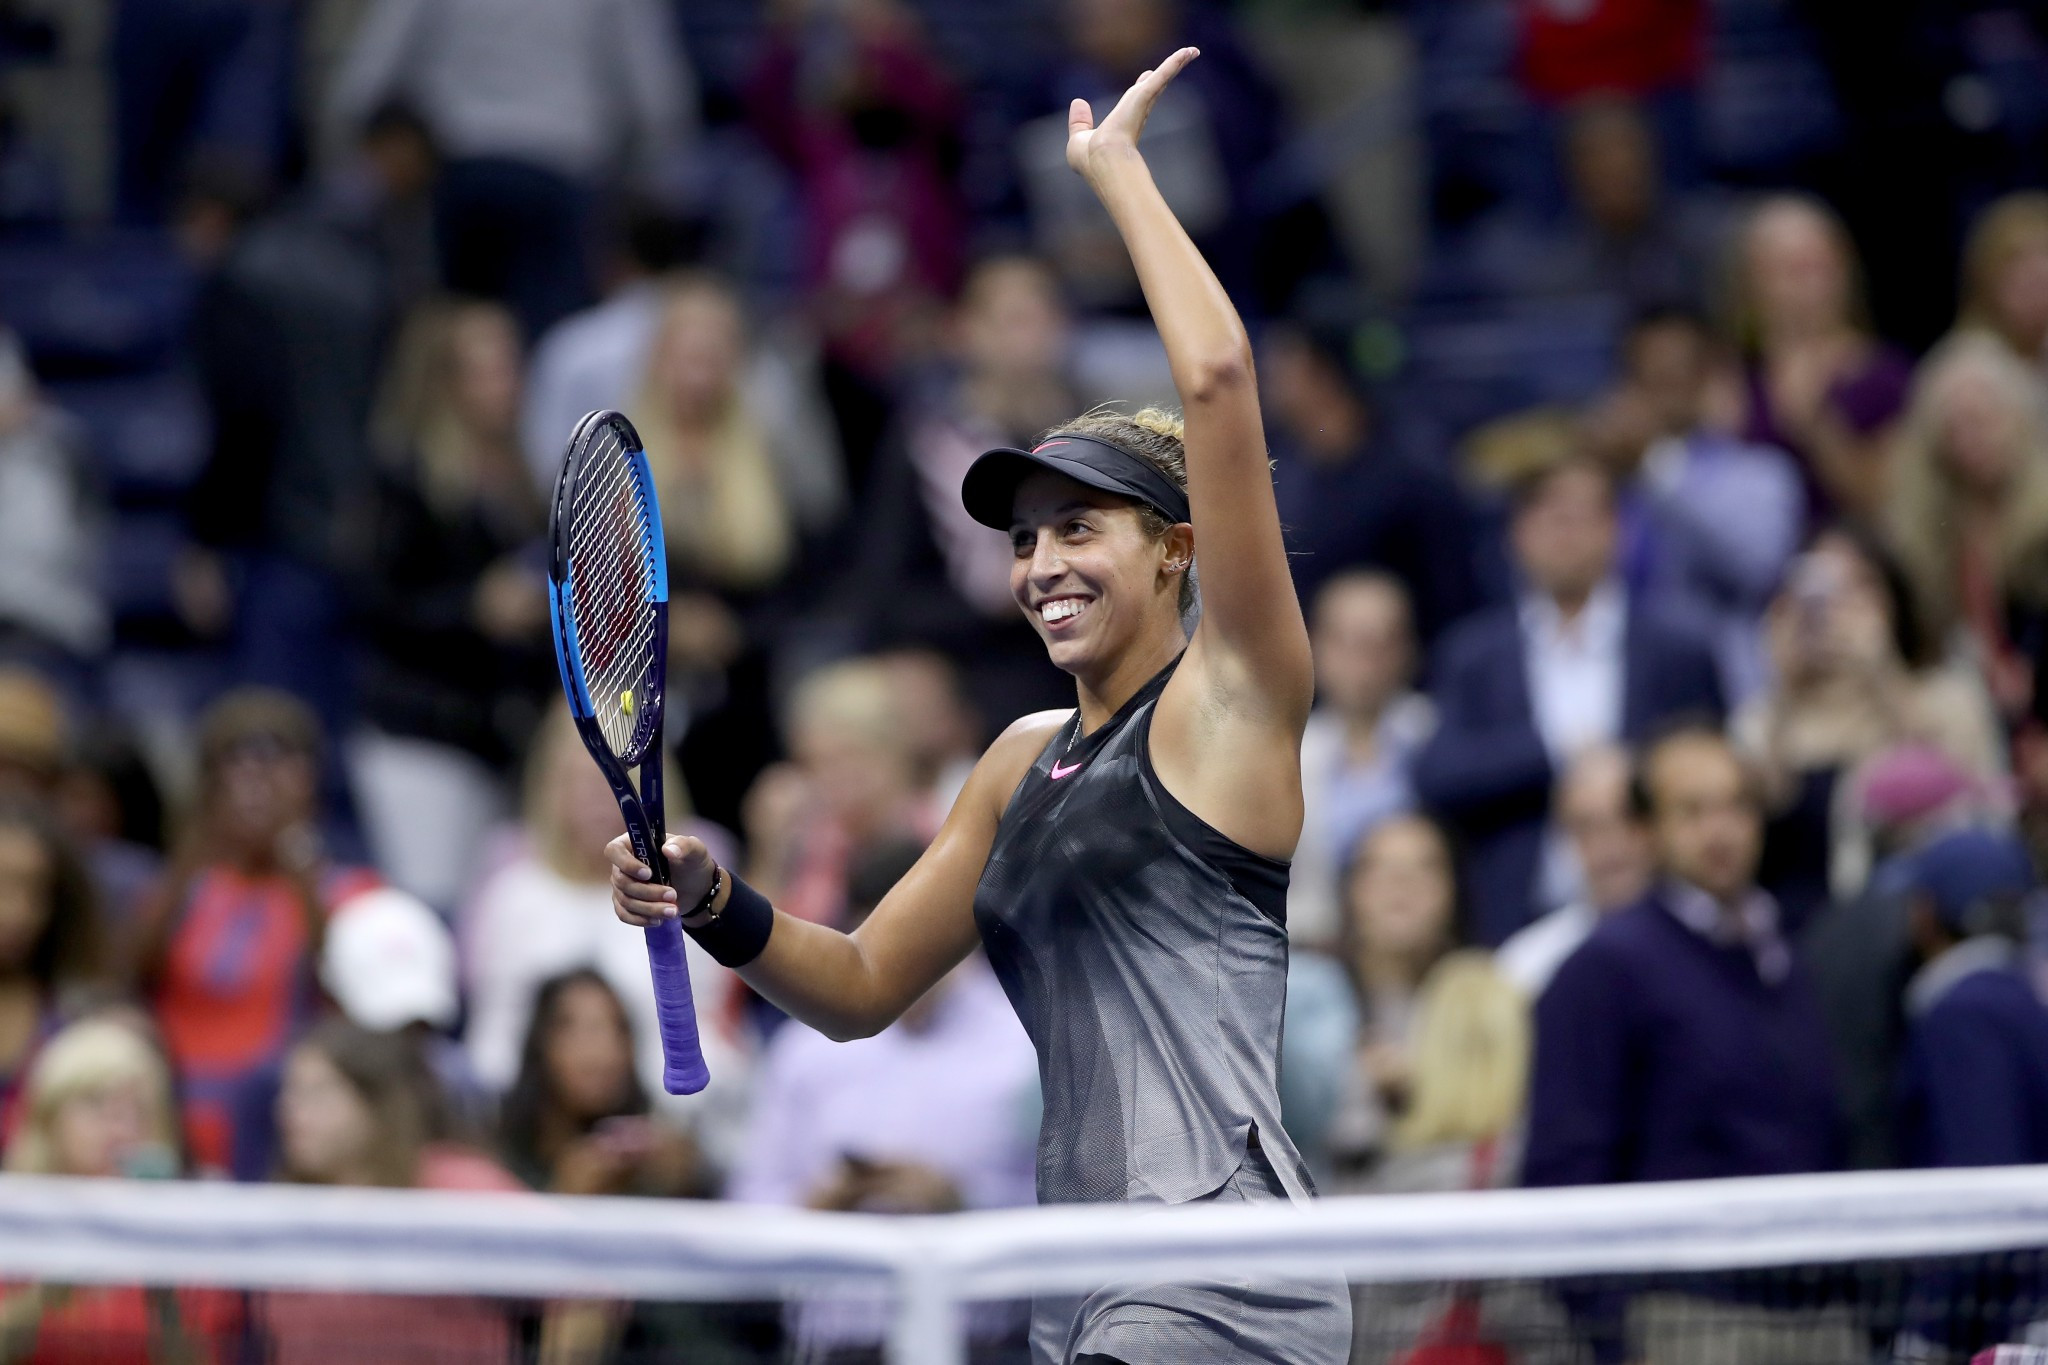 Madison Keys is through to the final of the US Open in New York City ©Getty Images